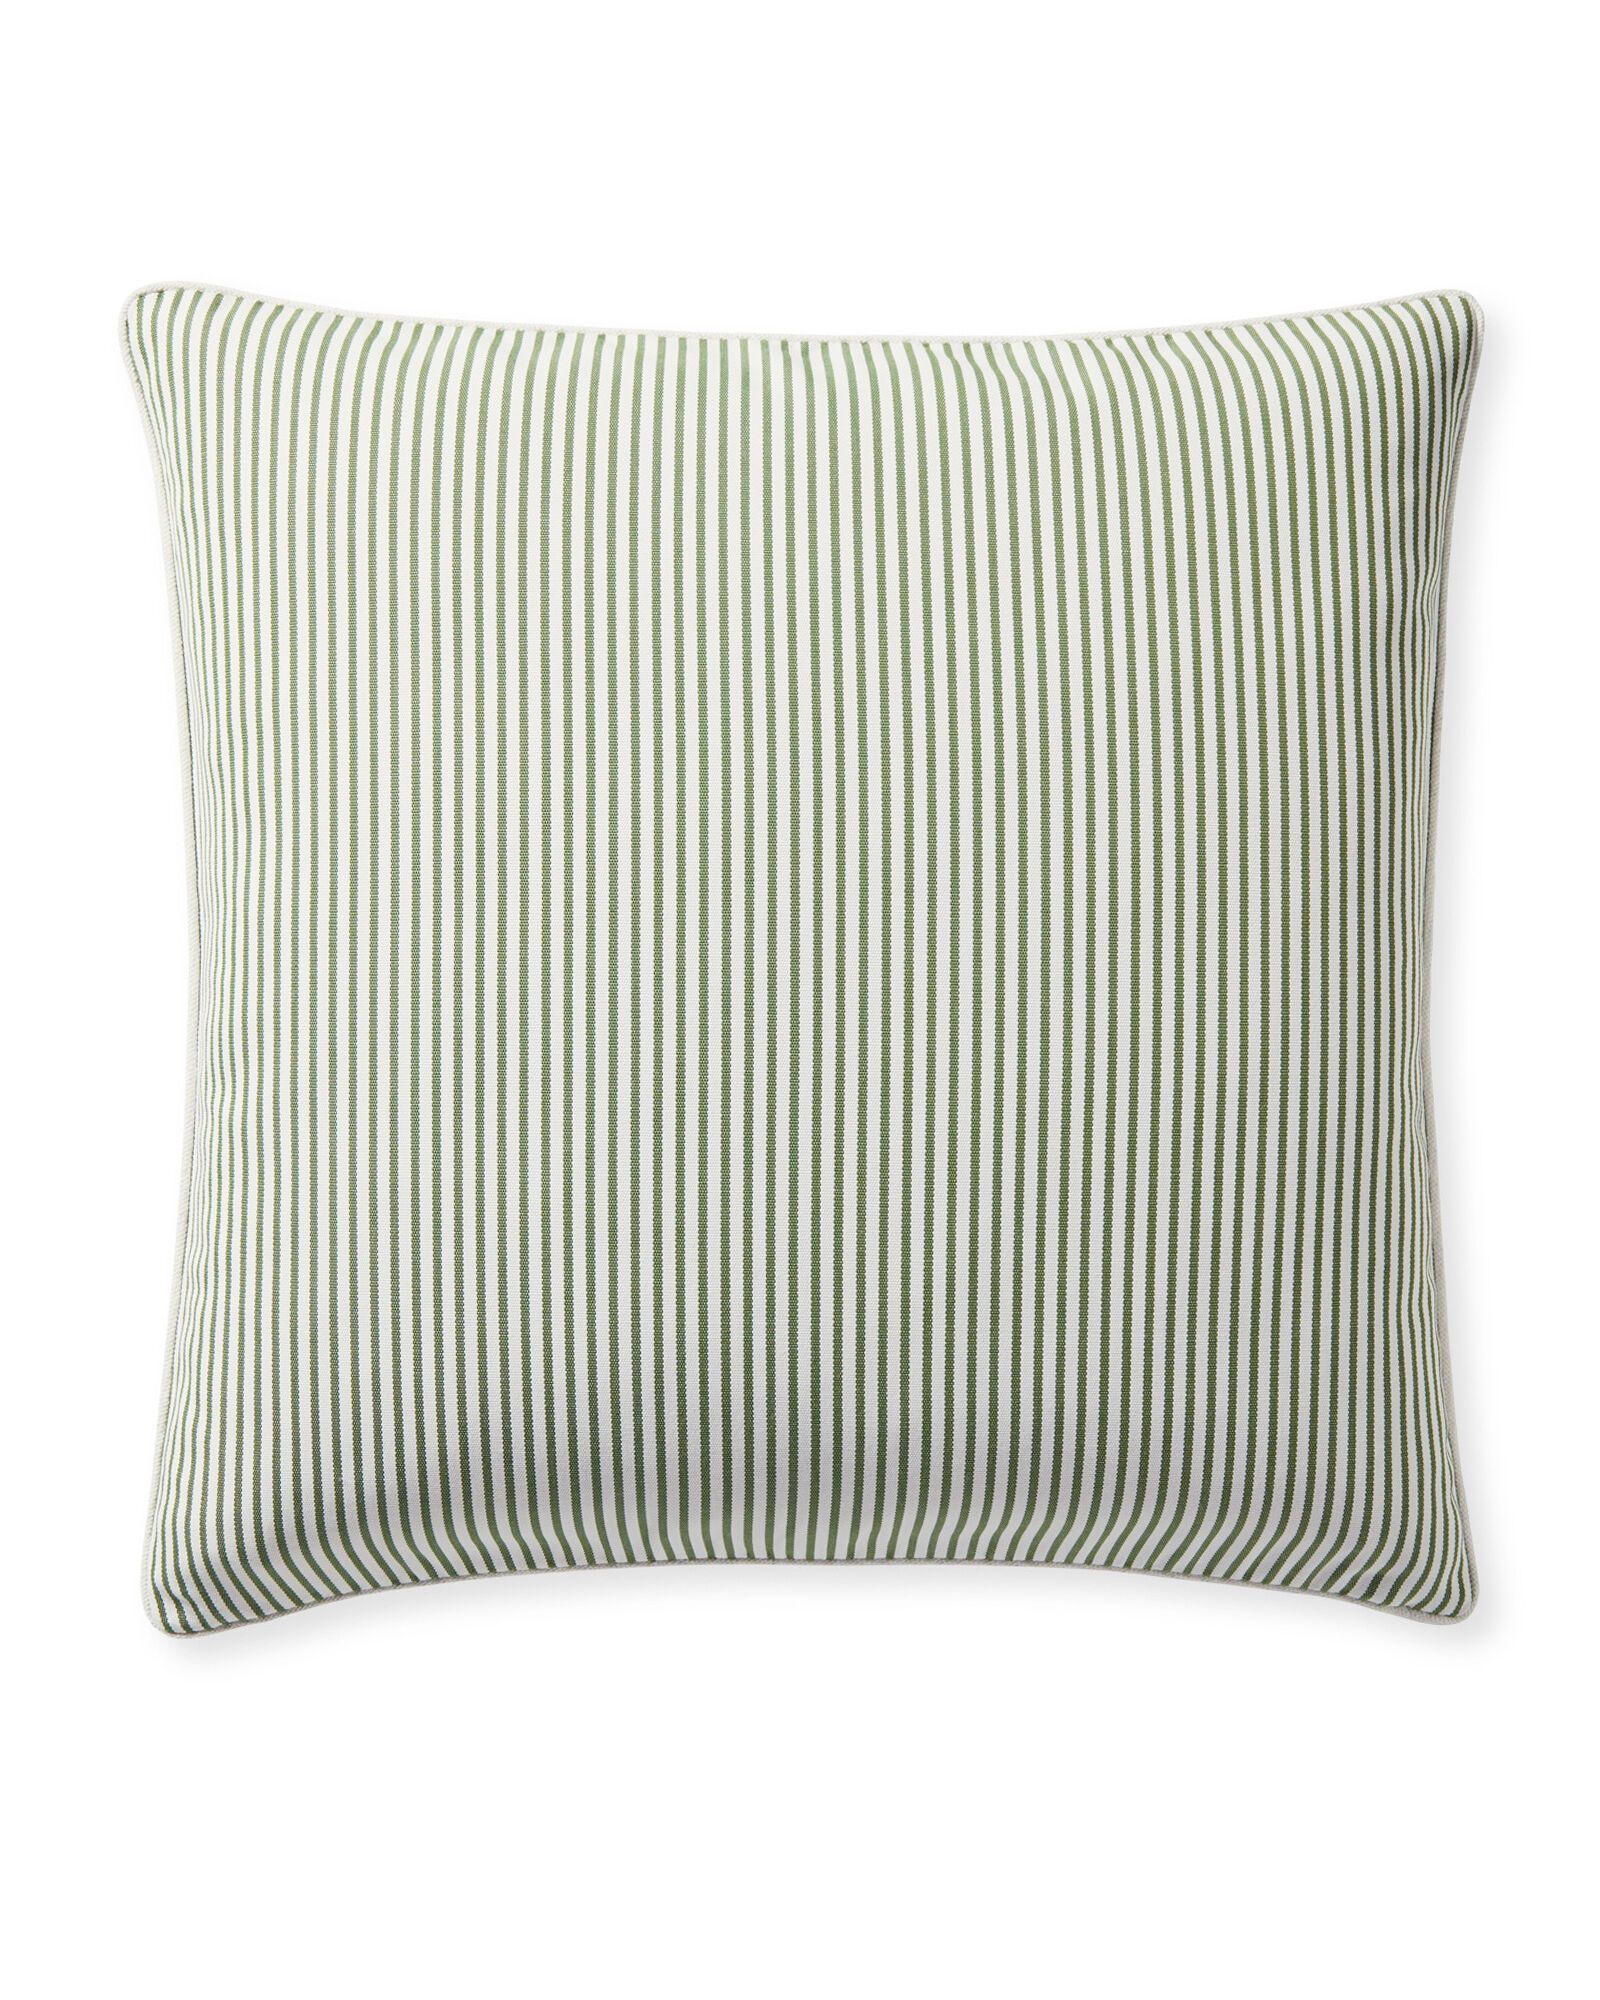 Perennials Pinstripe Pillow Cover | Serena and Lily